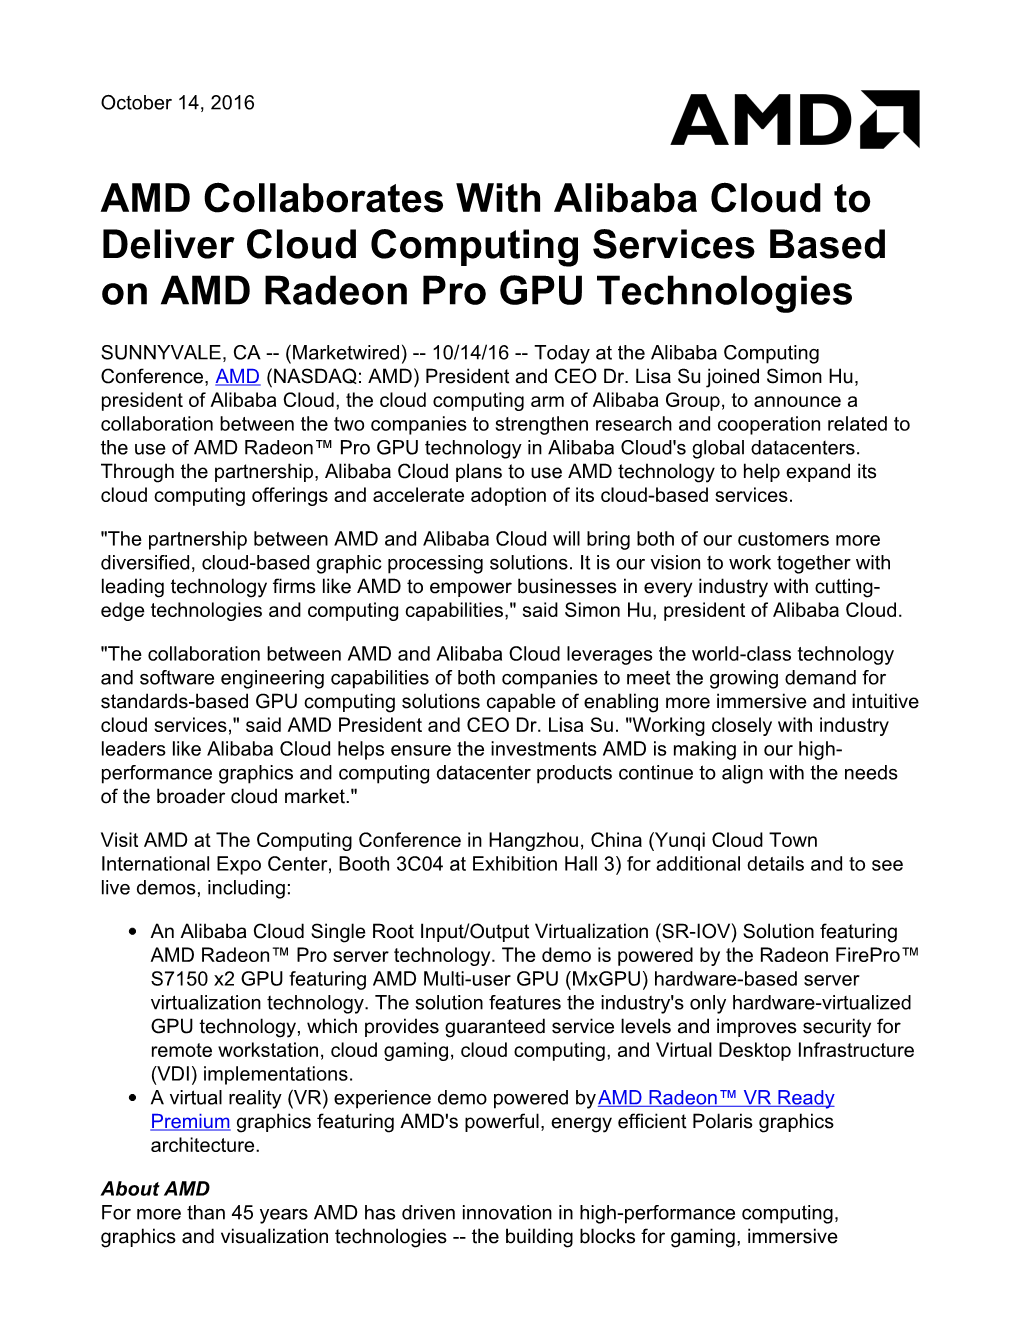 AMD Collaborates with Alibaba Cloud to Deliver Cloud Computing Services Based on AMD Radeon Pro GPU Technologies